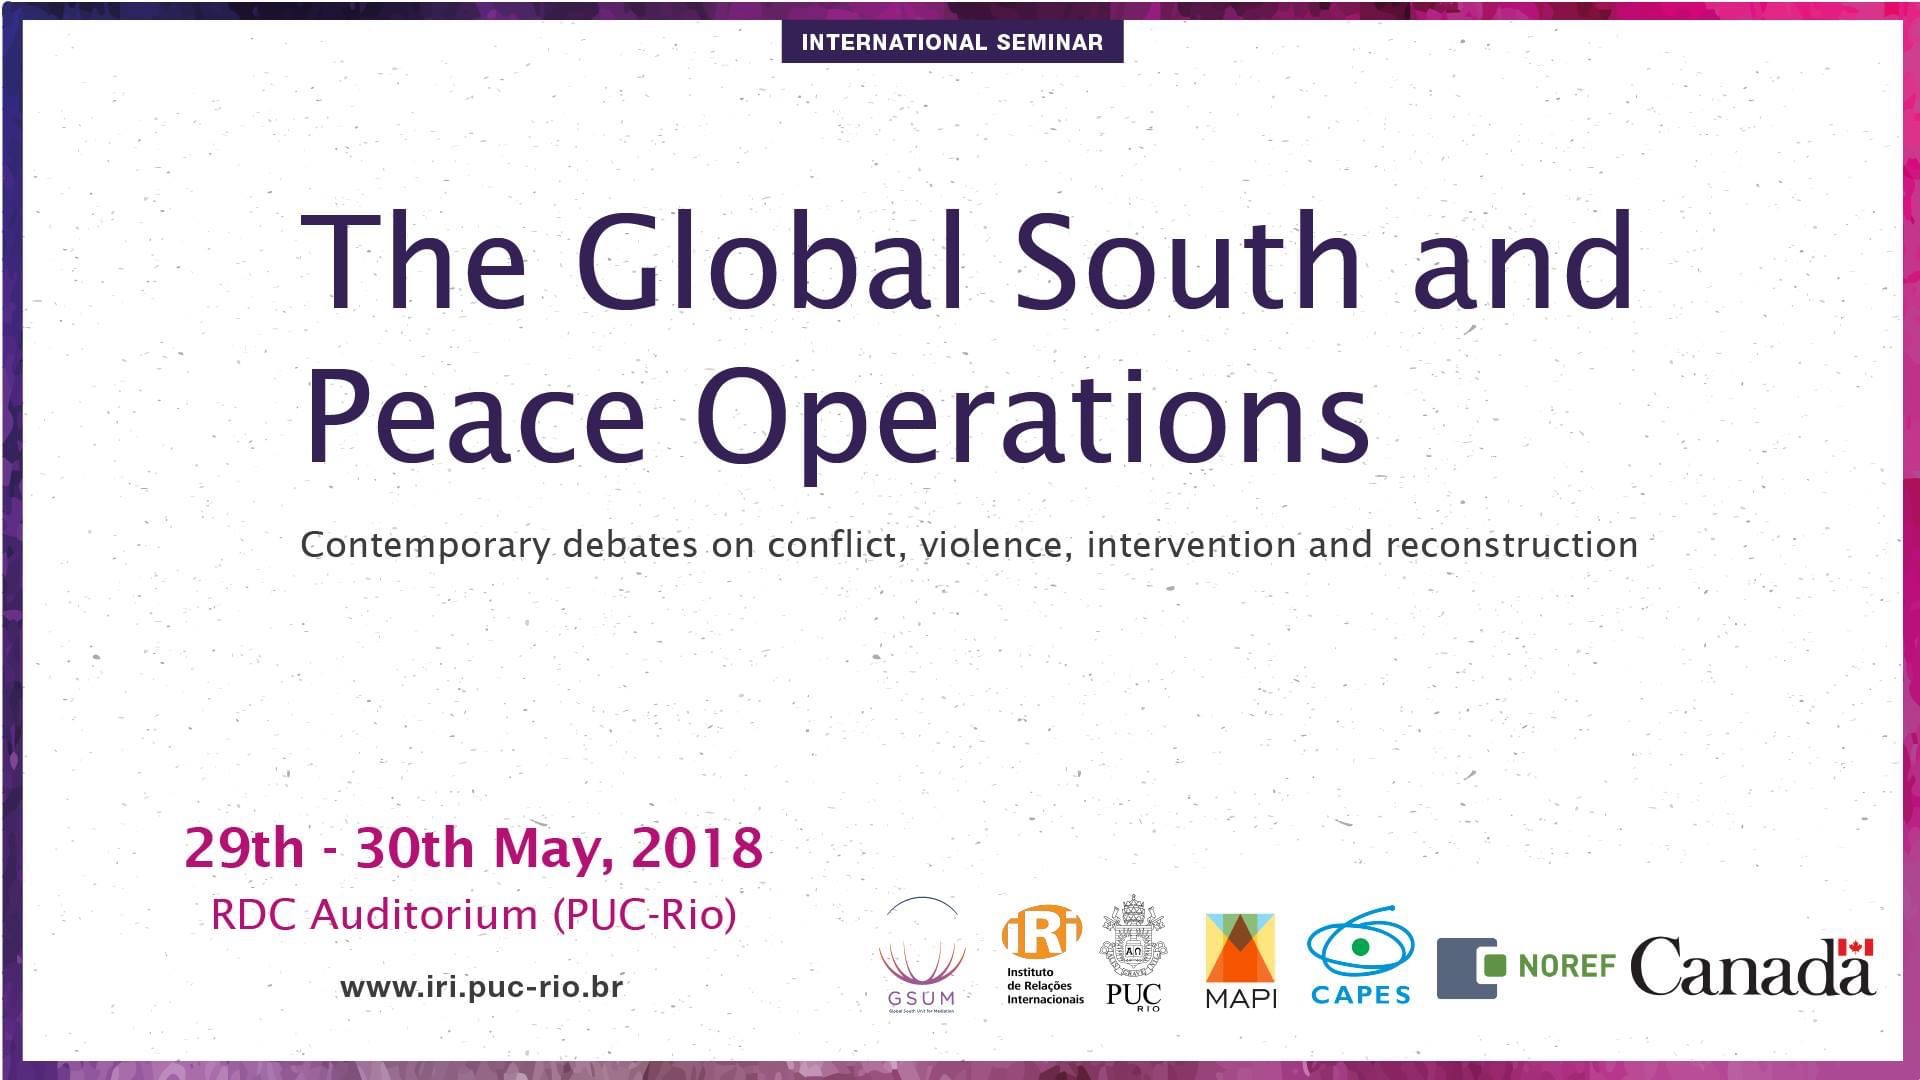 The Global South and Peace Operations: Contemporary debates on conflict, violence, intervention and reconstruction